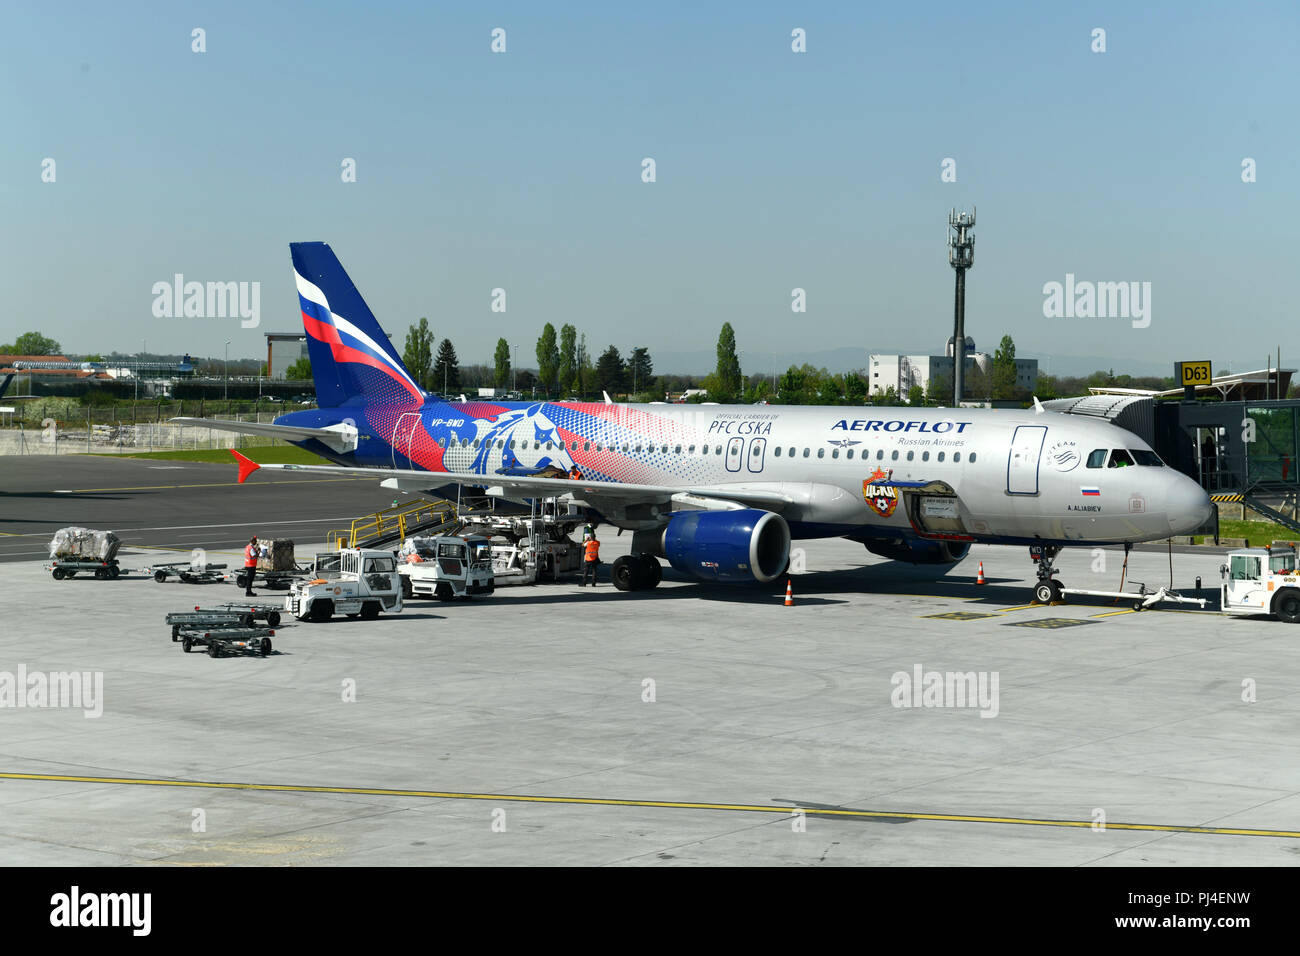 Colombier-Saugnieu (south-eastern France). 2018/04/19. Lyon Saint-Exupery Airport.  Airbus A320-214 on the tarmac, plane belonging to Aeroflot - Russi Stock Photo